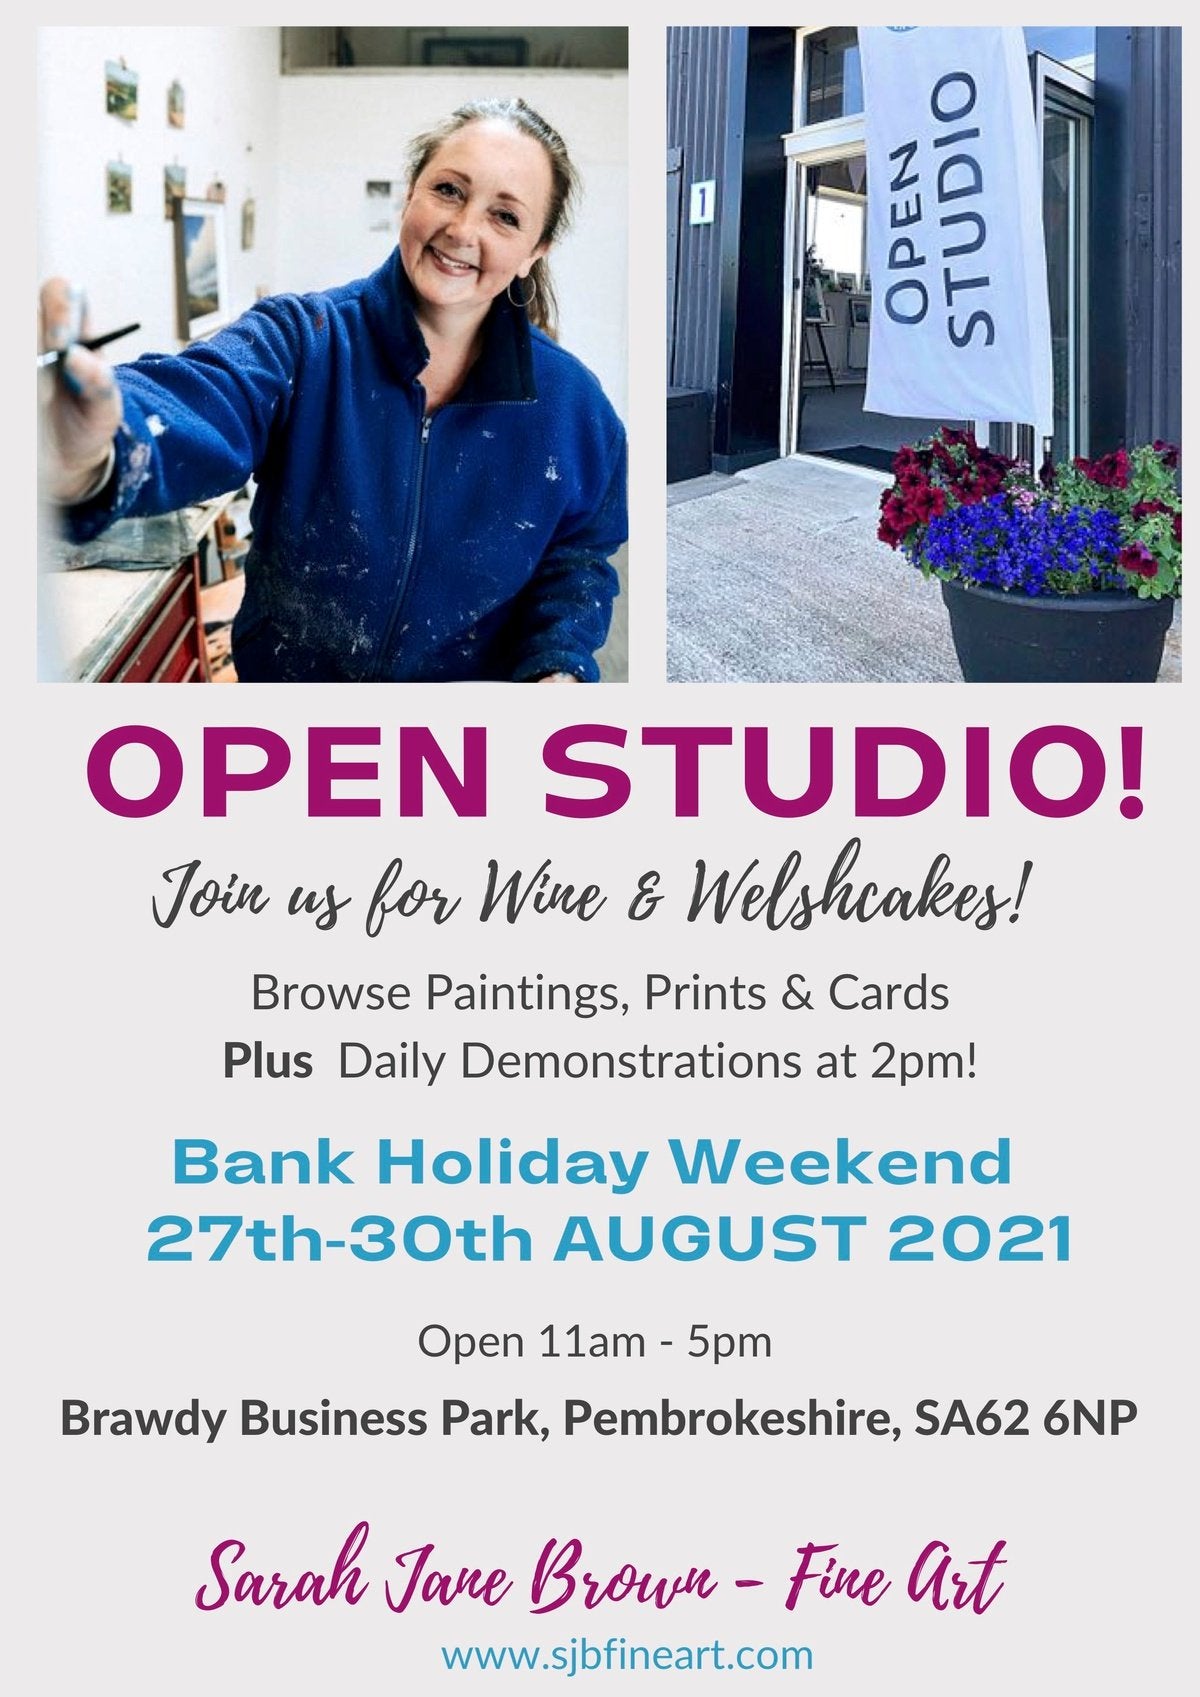 Daily painting demonstrations planned for Open Studio event